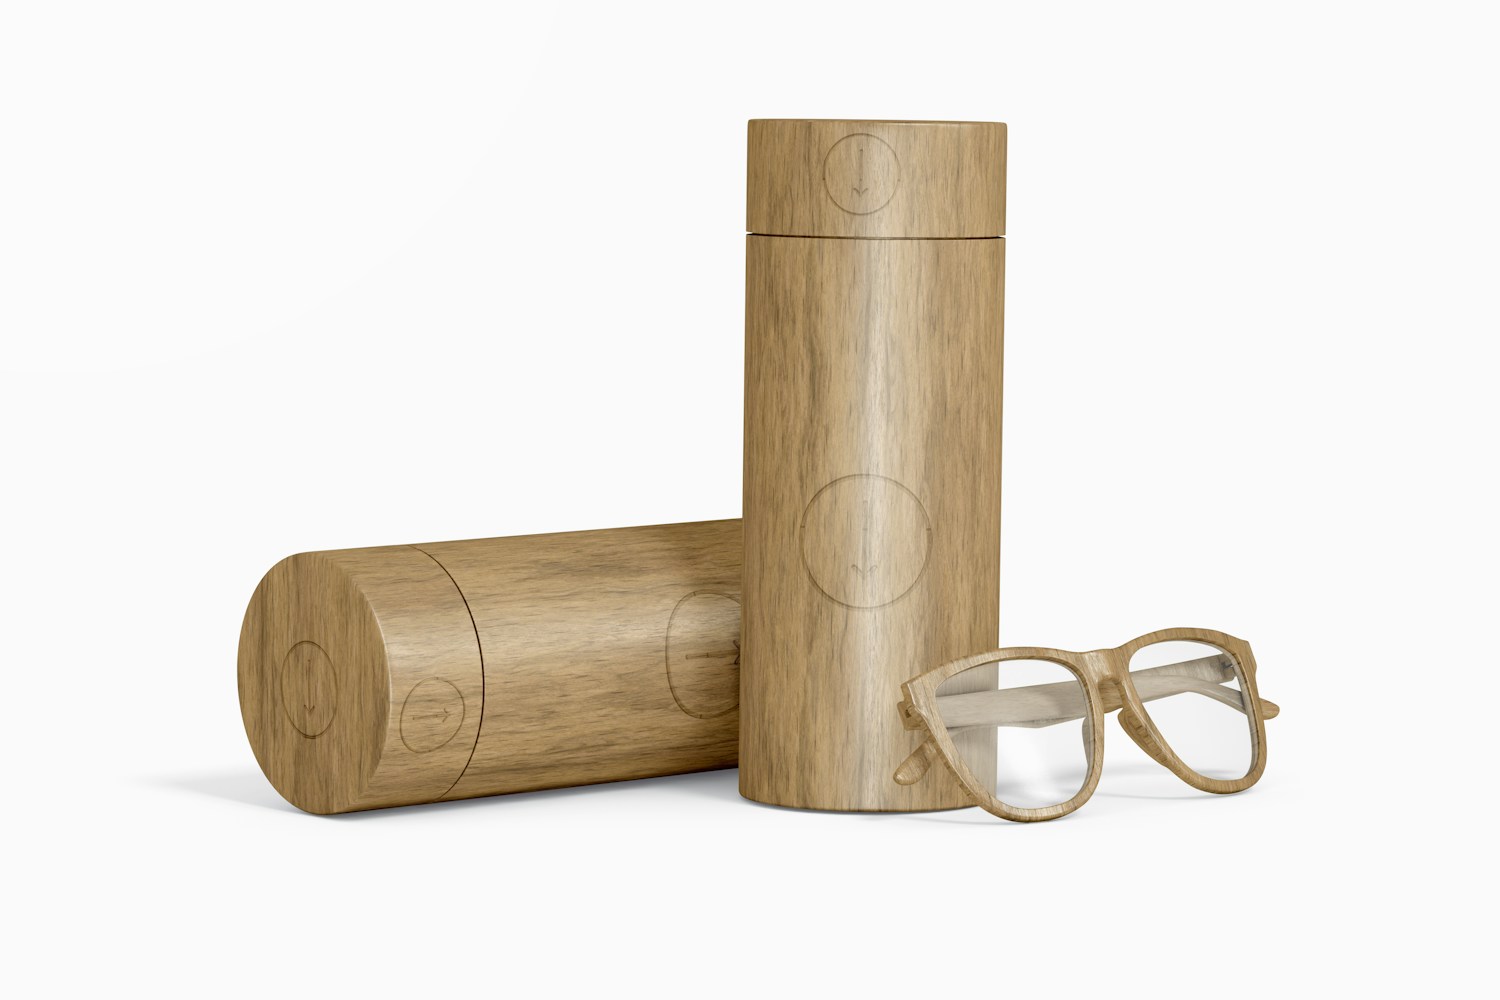 Bamboo Sunglasses Cases Mockup, Standing and Dropped